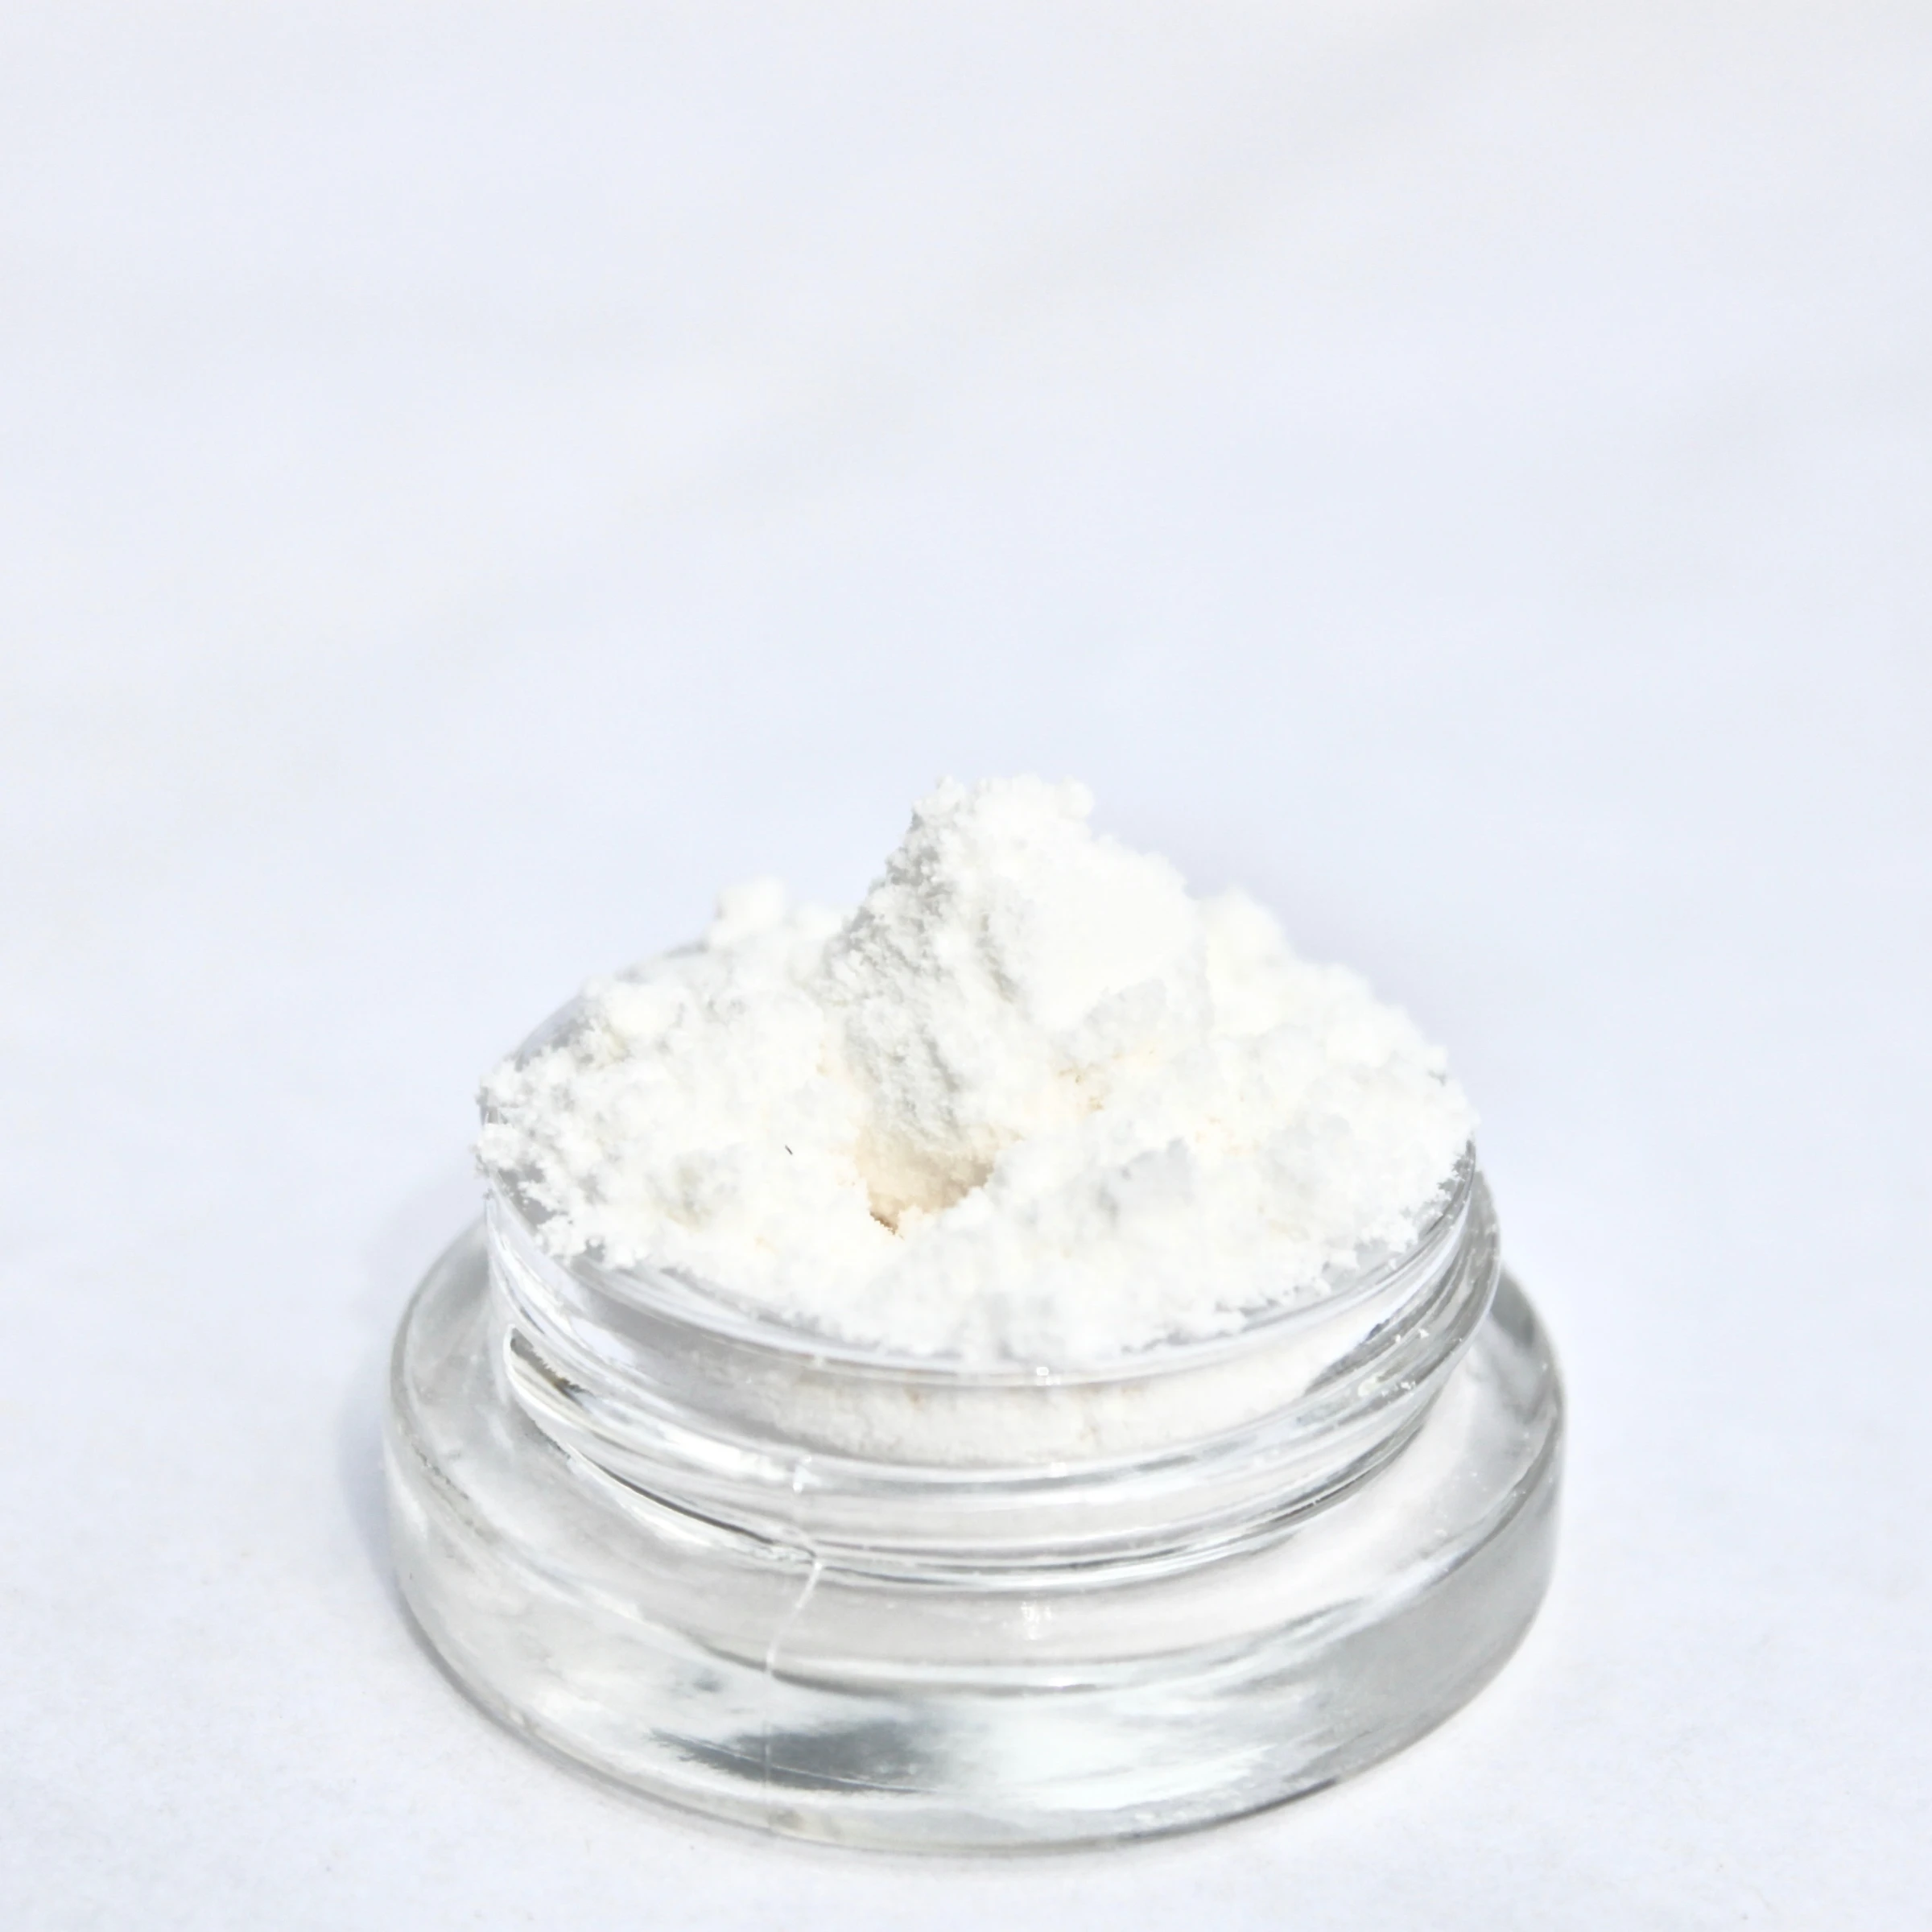 Private Label Organic CBD Isolate Powder Made in USA Low Price Fast Shipping LOW MOQs No THC Bulk